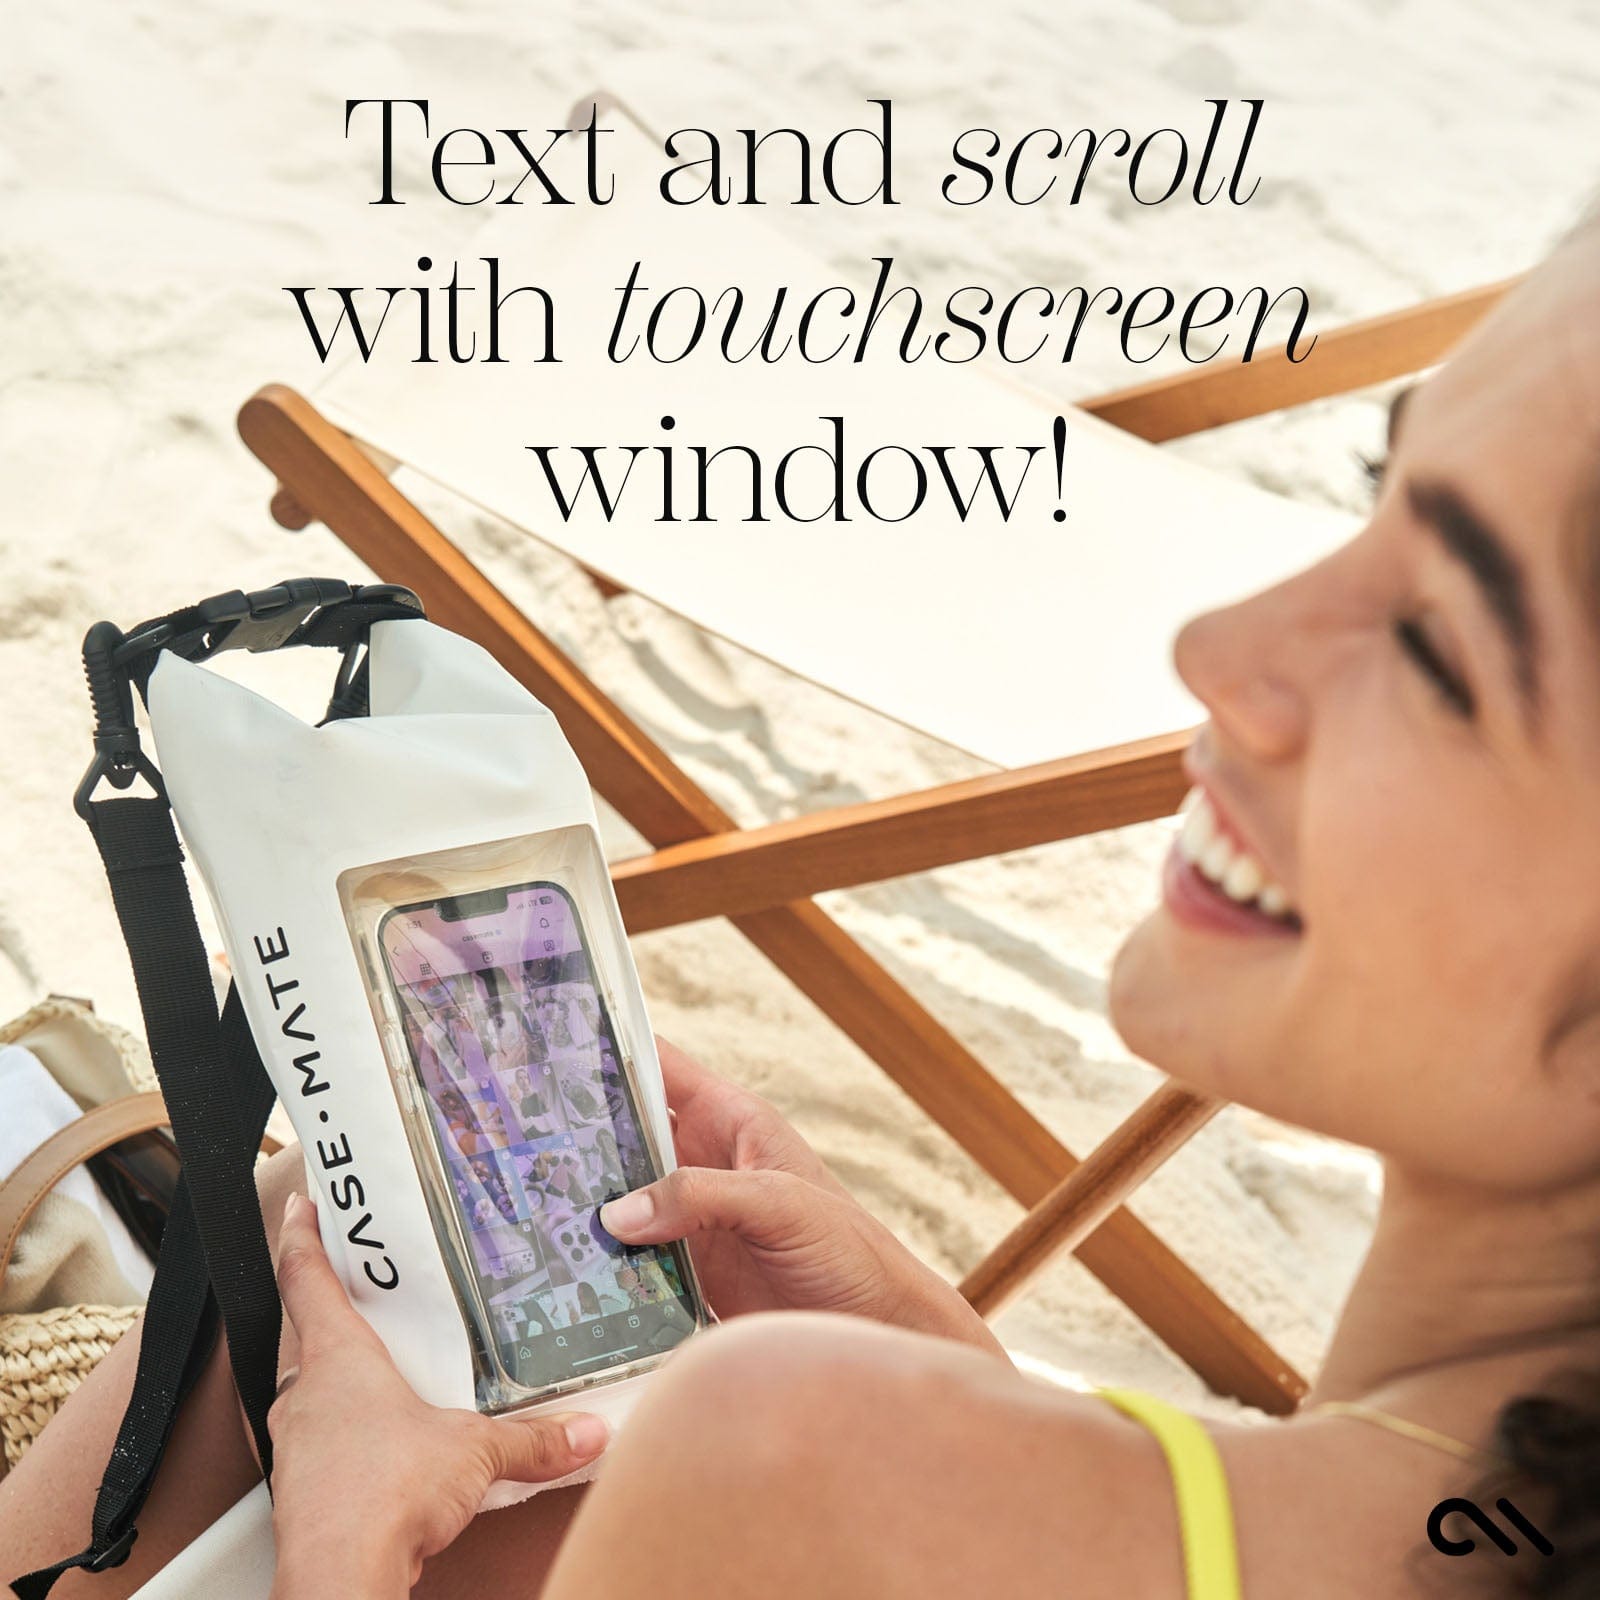 TEXT AND SCROLL WITH TOUCHSCREEN WINDOW